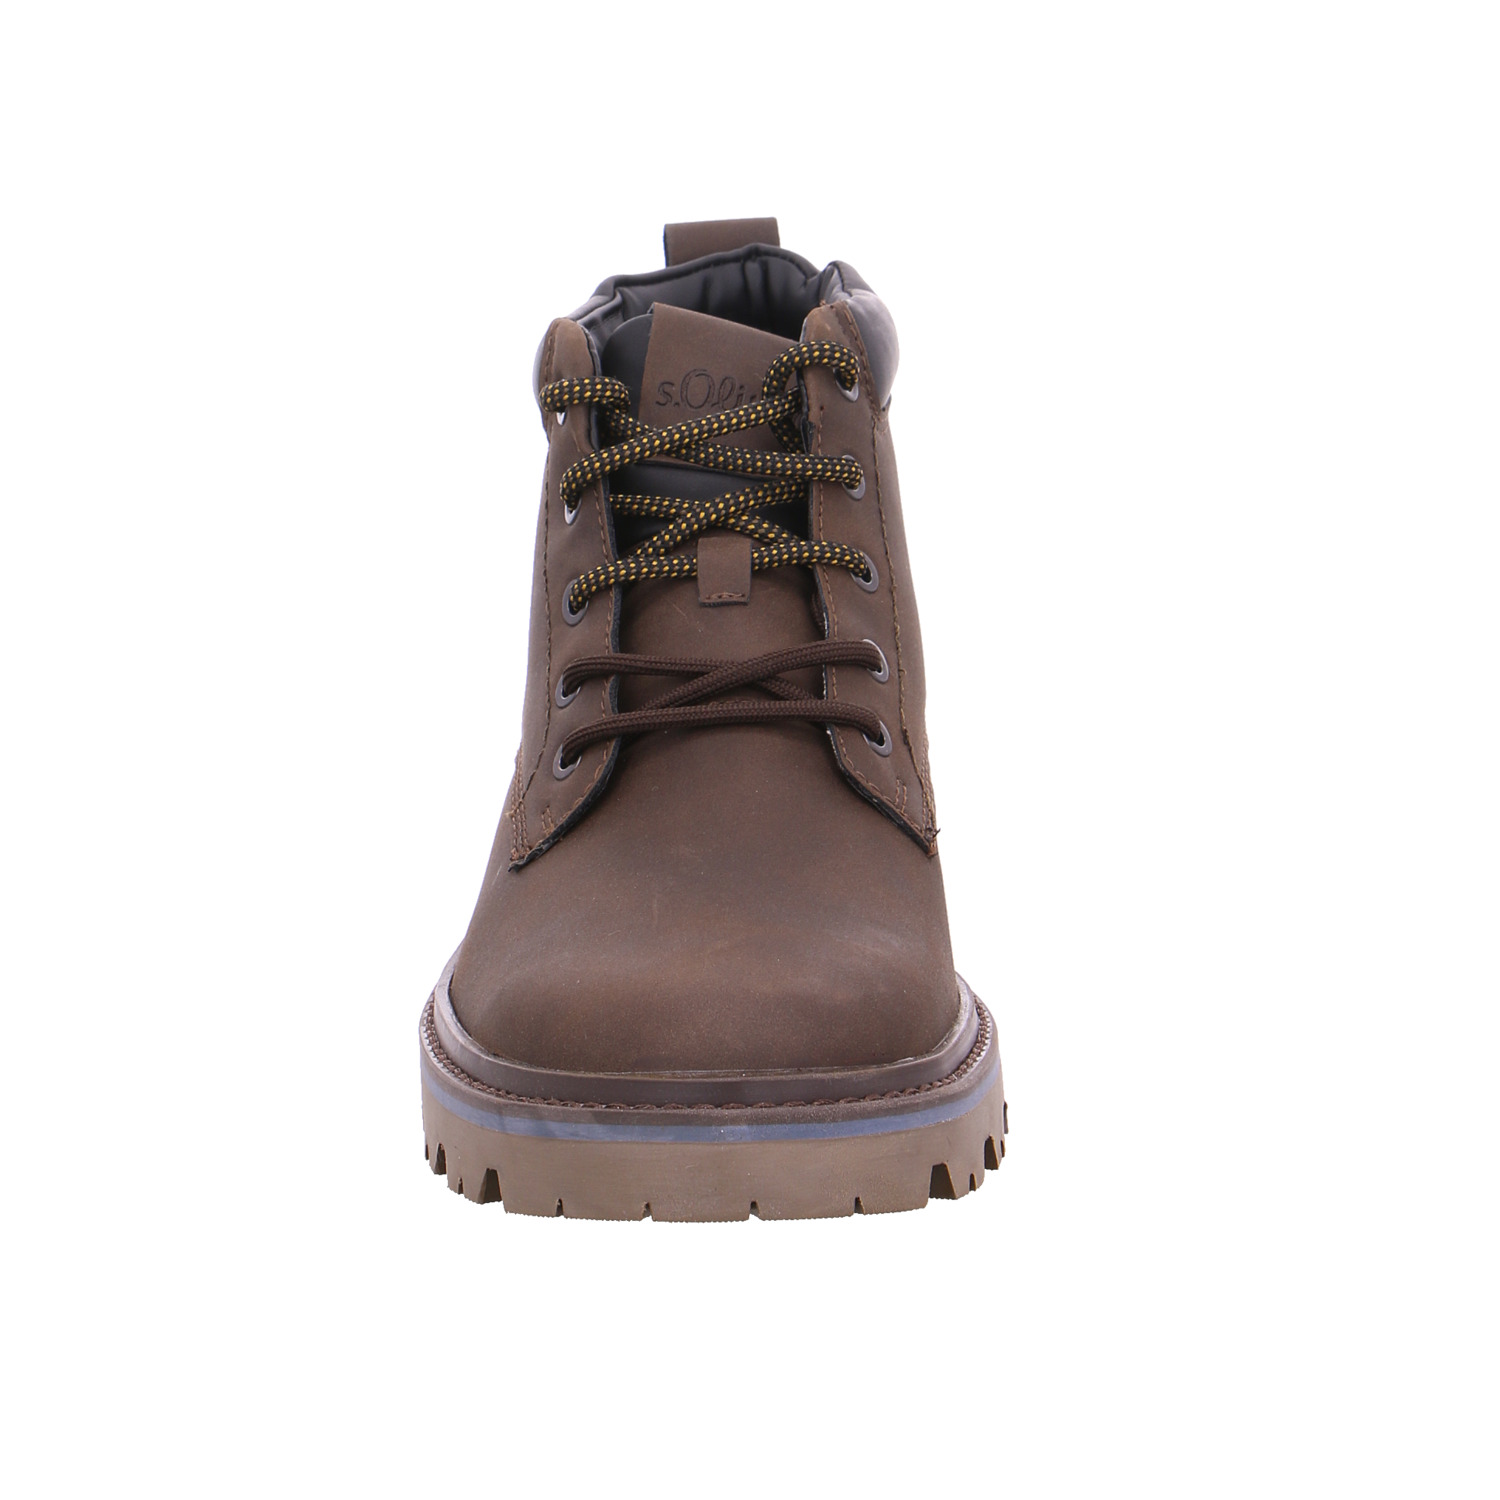 S.OLIVER Winter-Boots Braun Synthetik FN6869